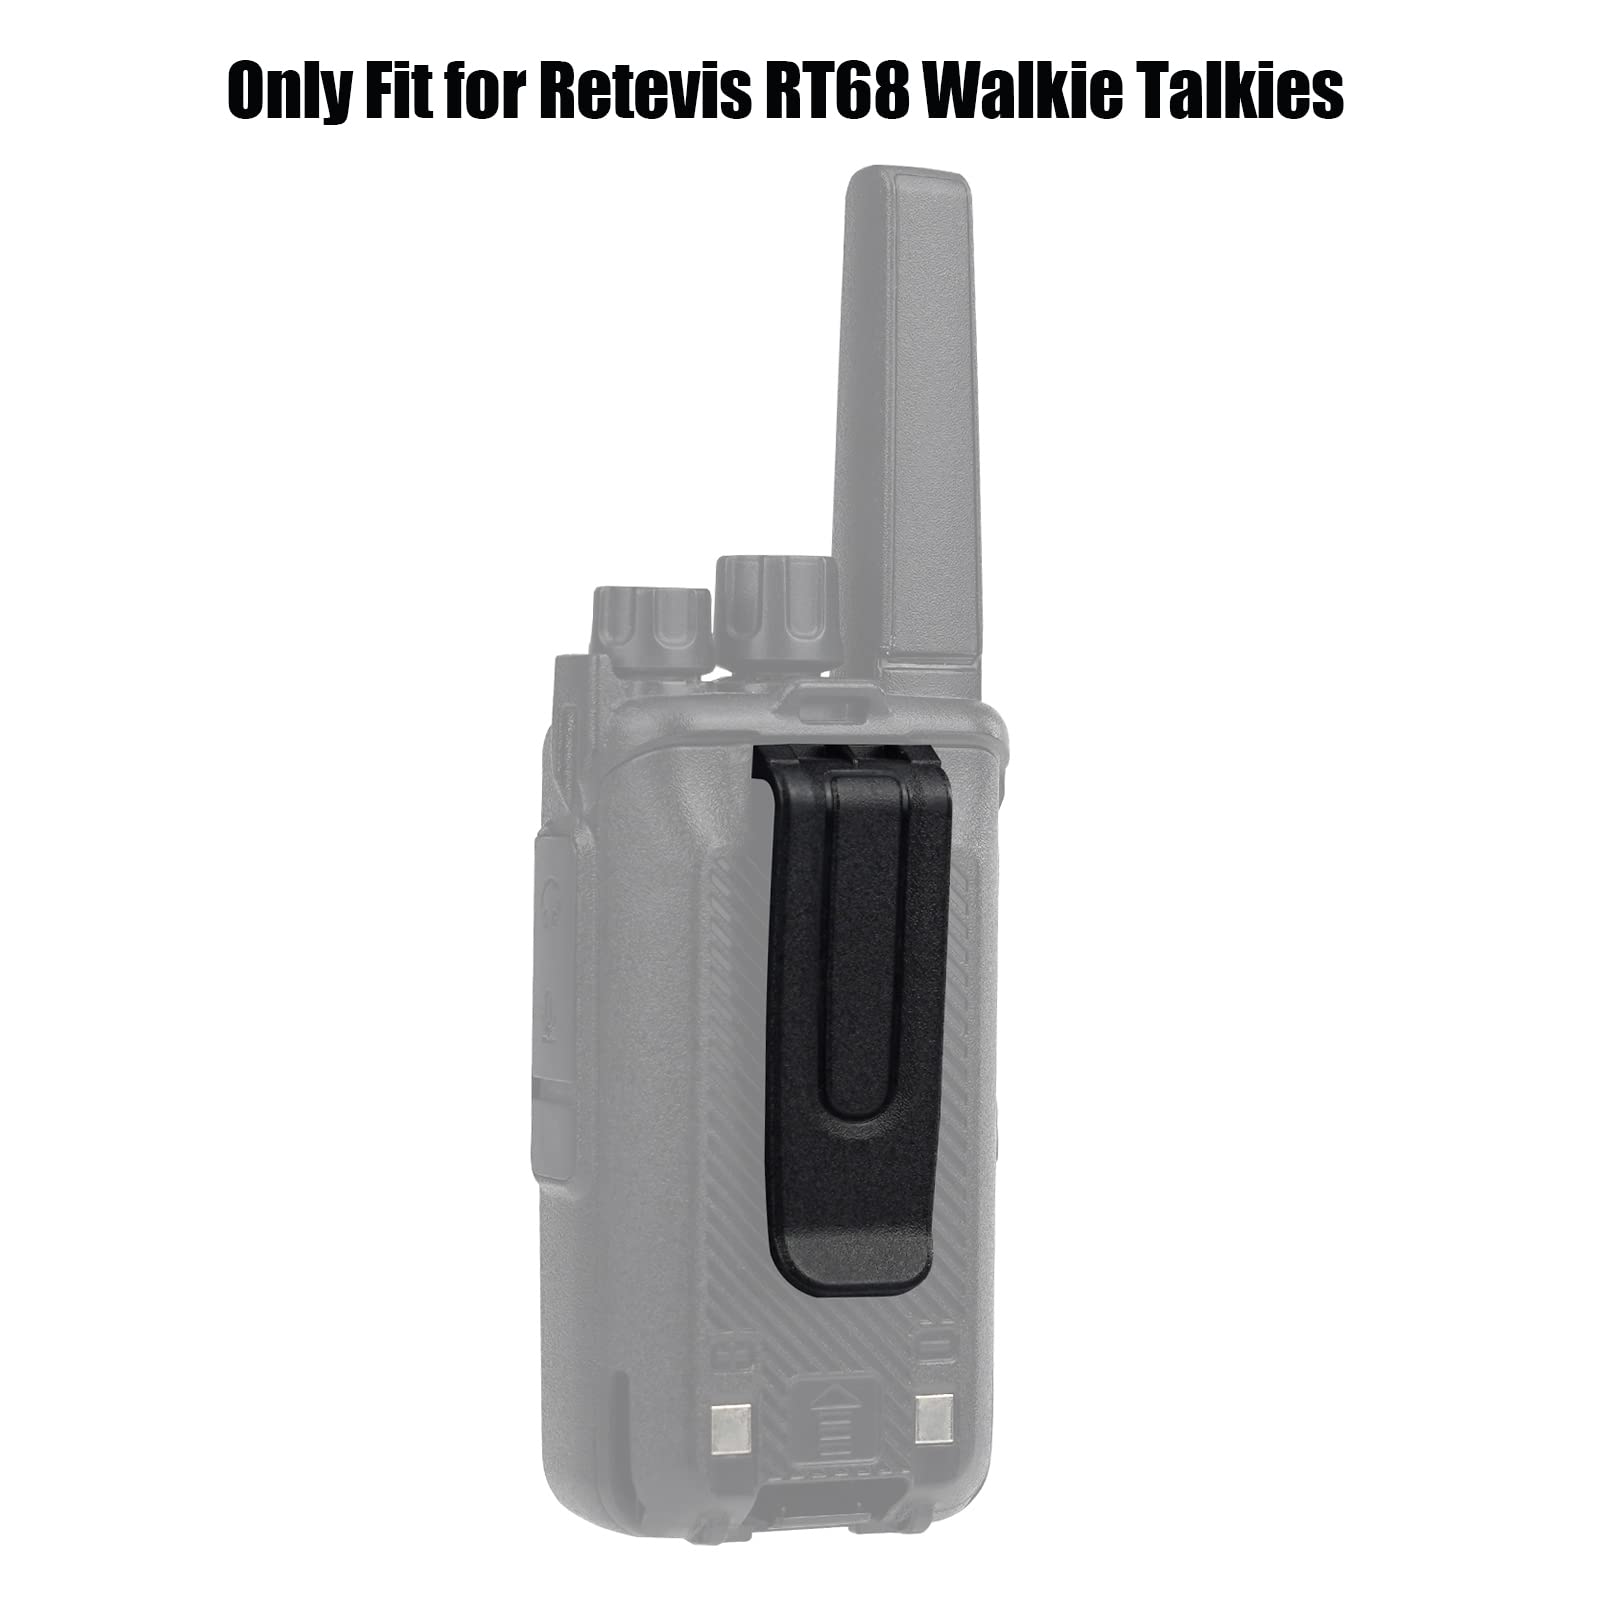 Retevis RT68 Walkie Talkie Belt Clips,Belt Clip Only Compatible with RT68 2 Way Radio(6 Pack)